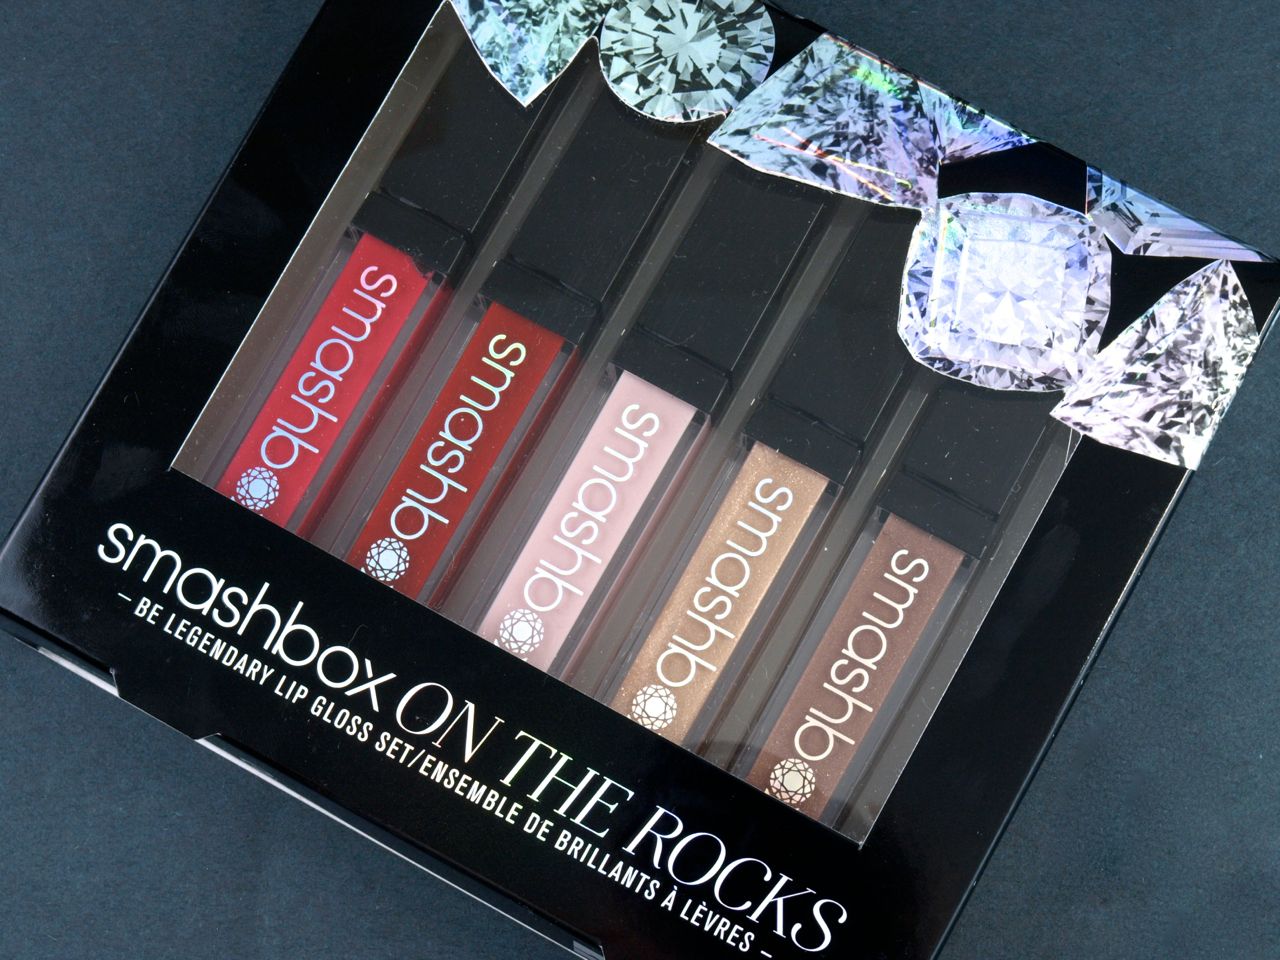 Smashbox On The Rocks Be Legendary Lip Gloss Set: Review and Swatches